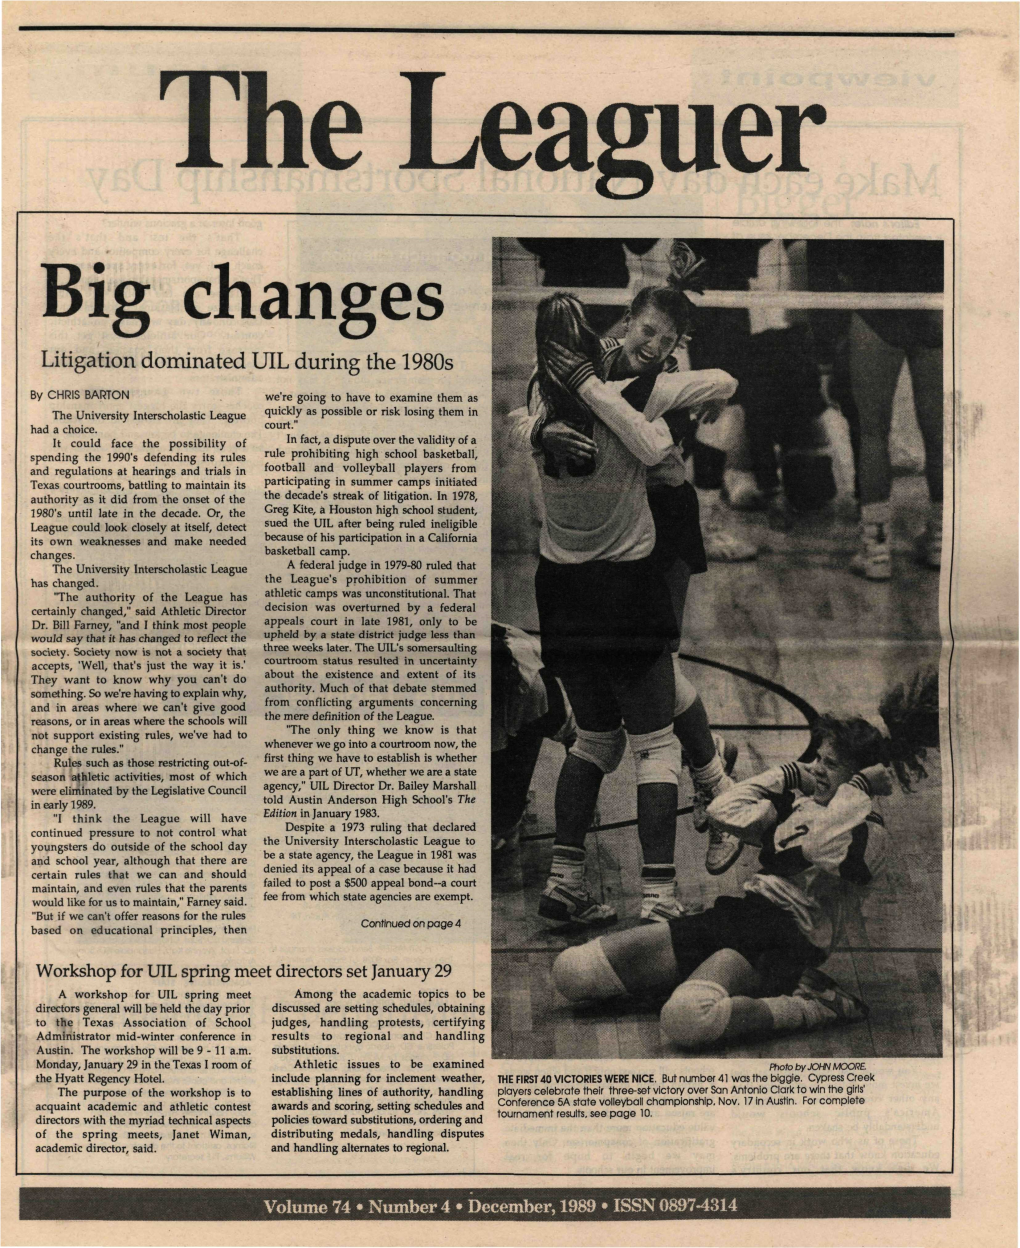 Big Changes Litigation Dominated UIL During the 1980S